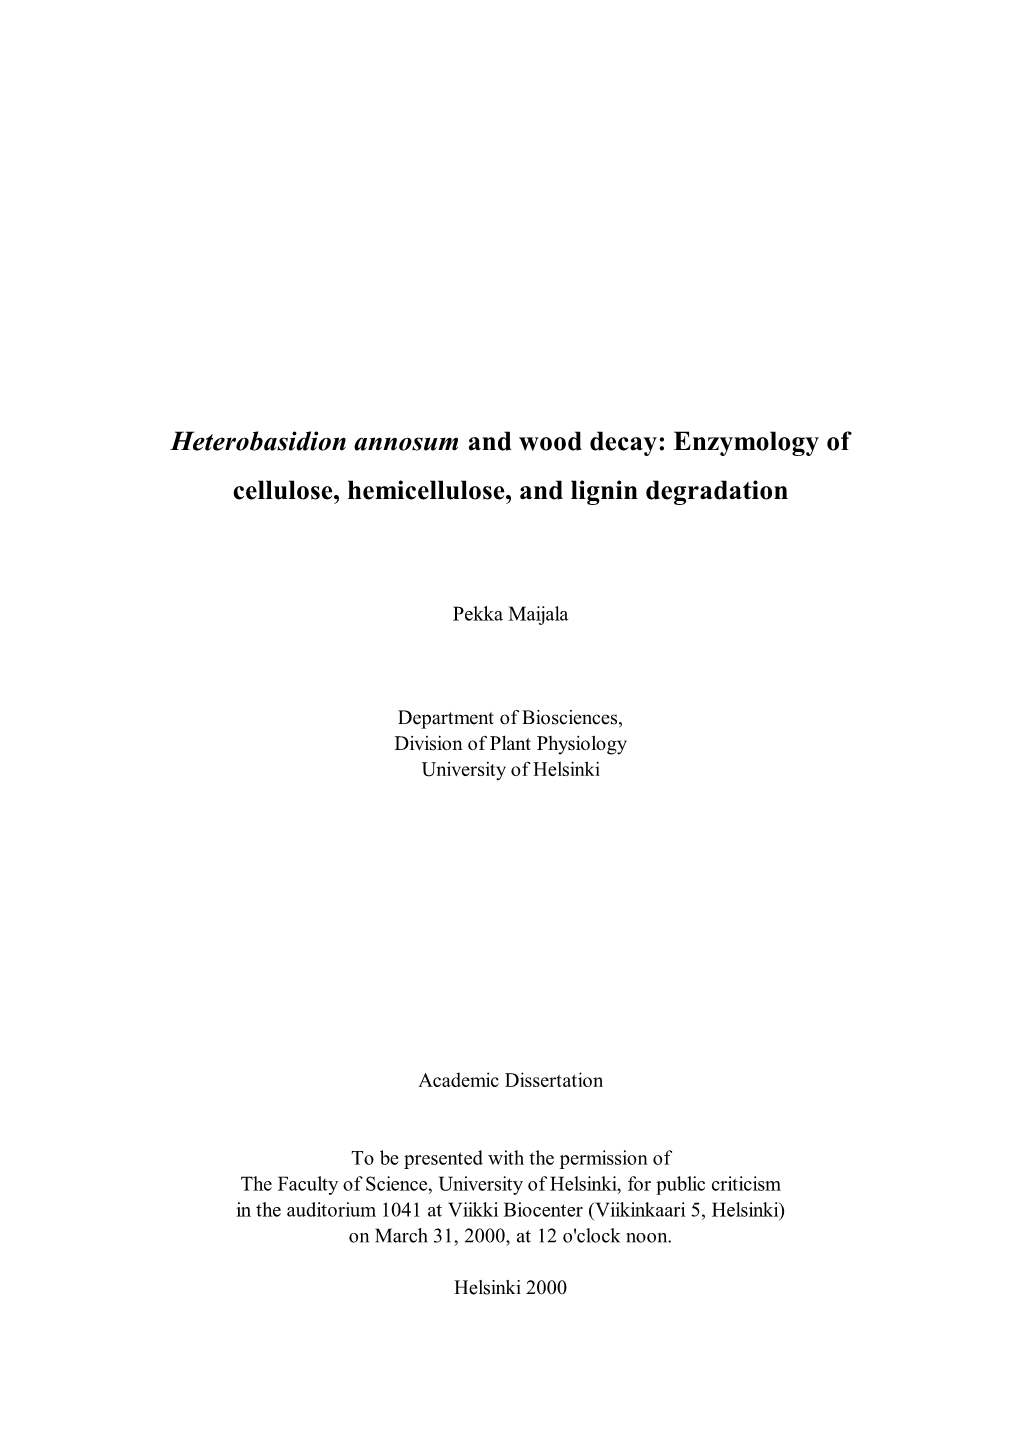 Enzymology of Cellulose, Hemicellulose, and Lignin Degradation